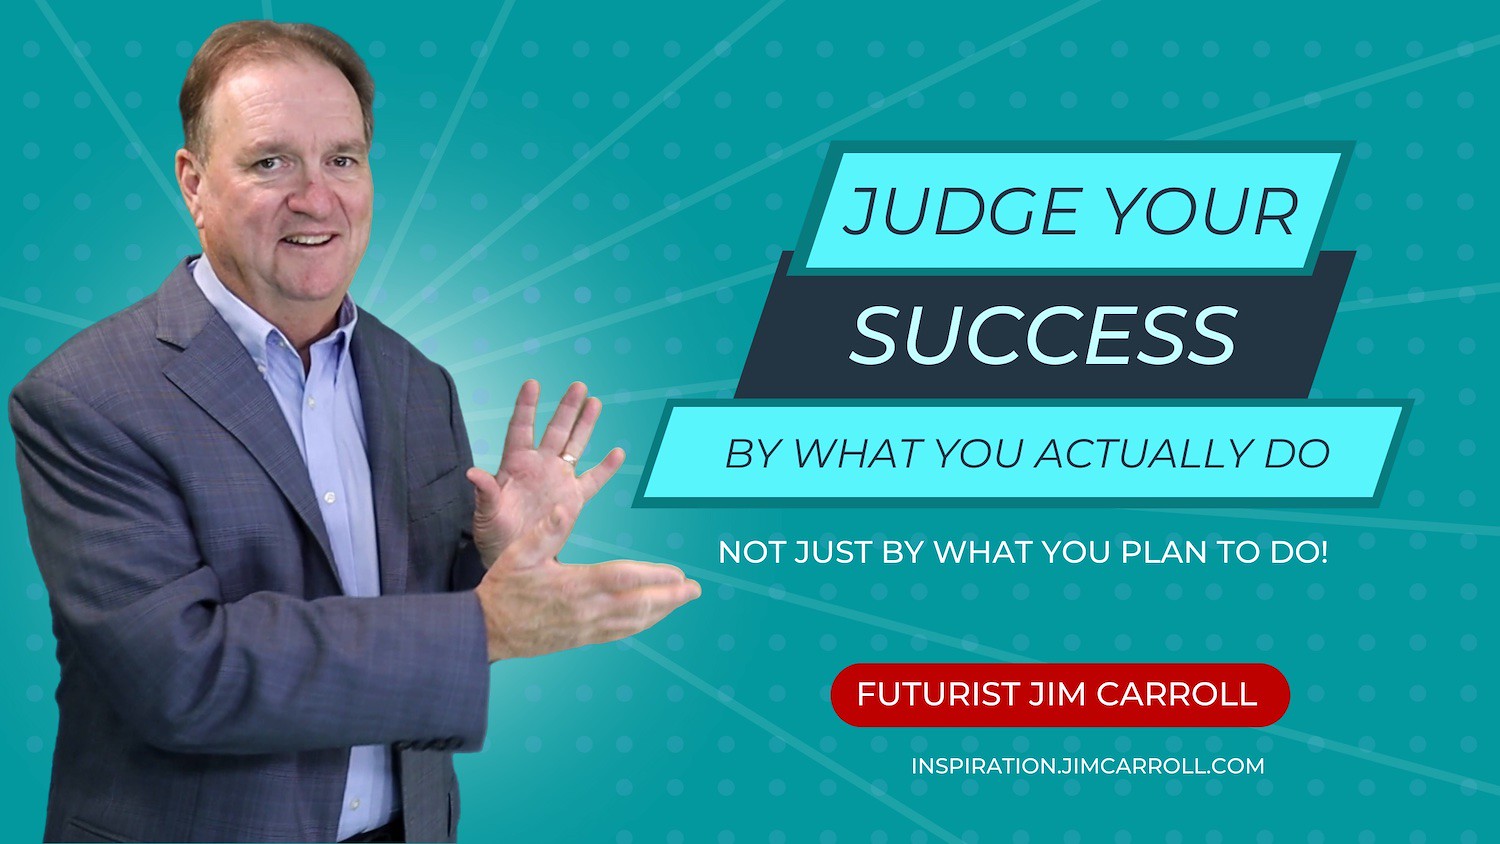 "Judge your success by what you actually do. Not just by what you plan to do!" - Futurist Jim Carroll